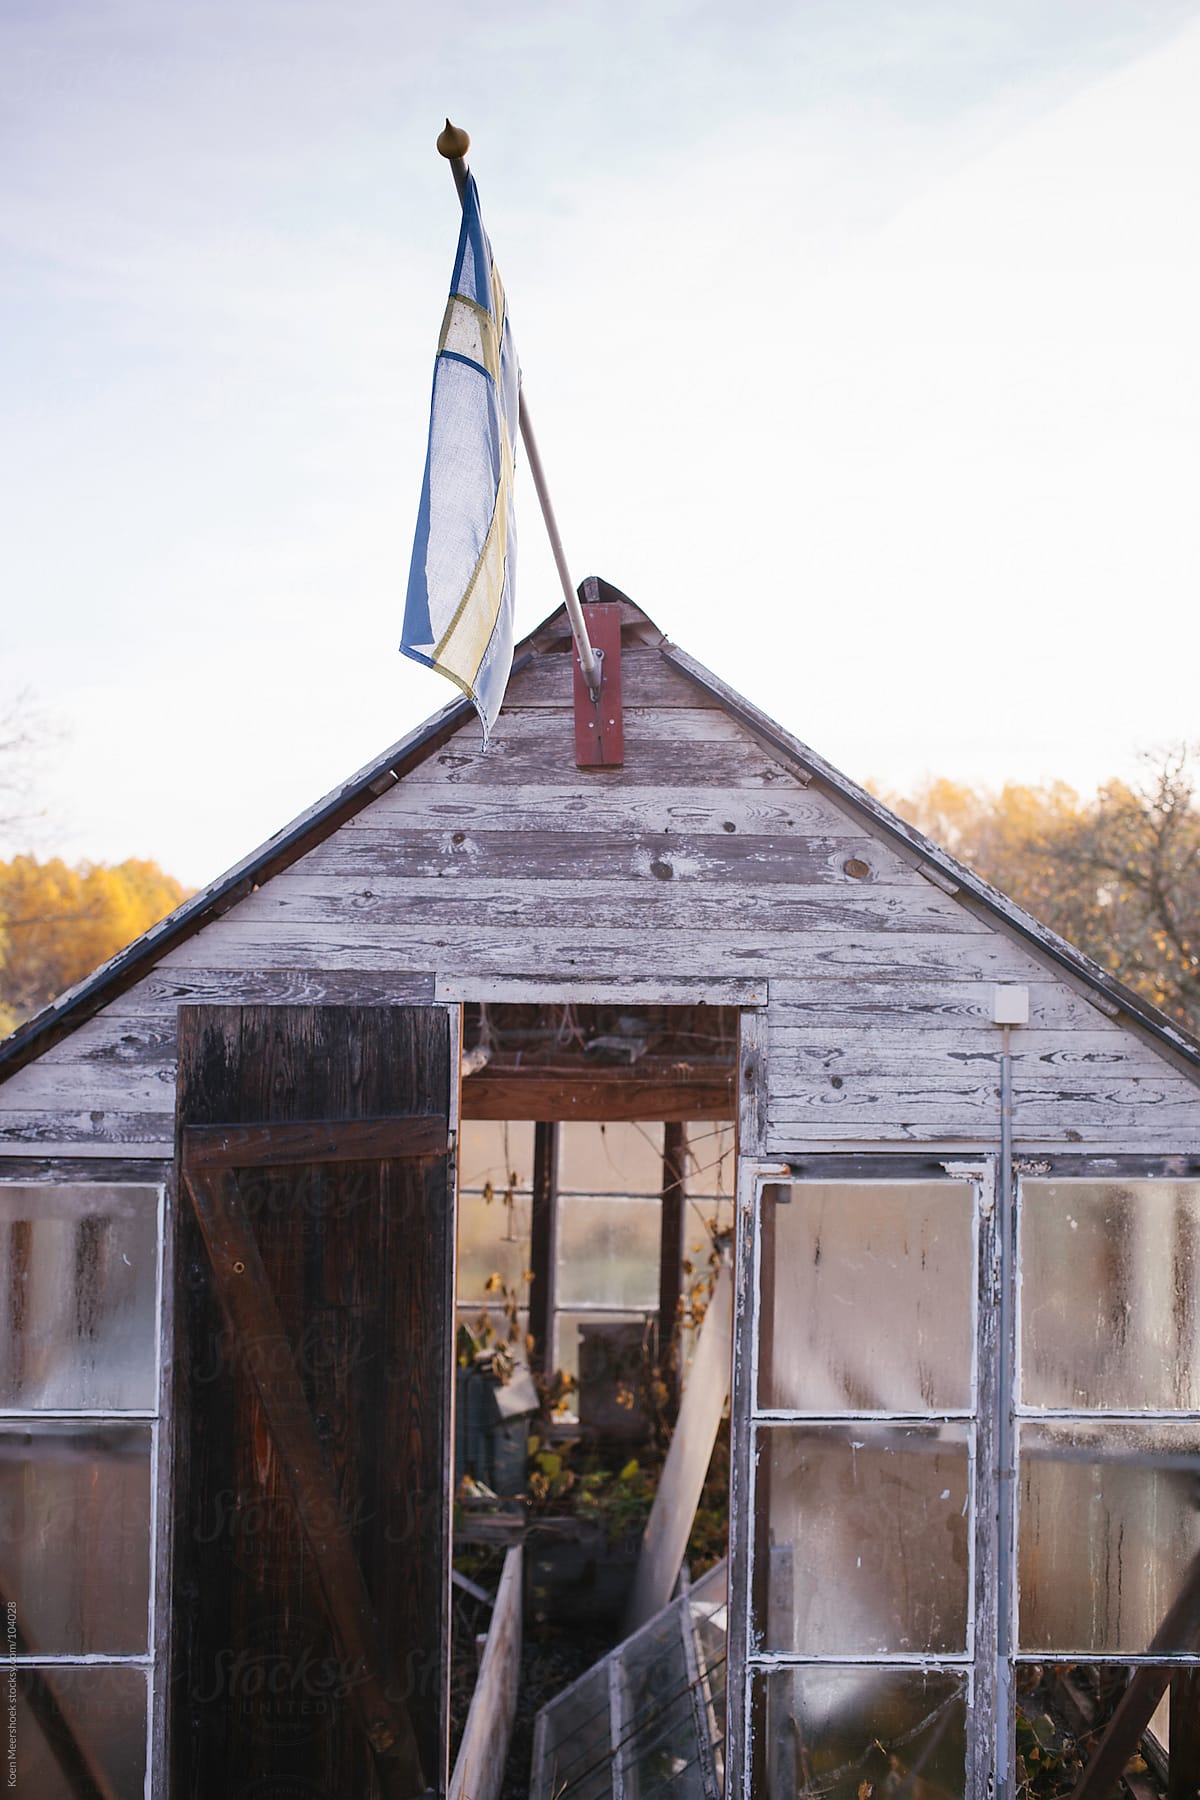 A small abandoned greenhouse with the Swedish flag